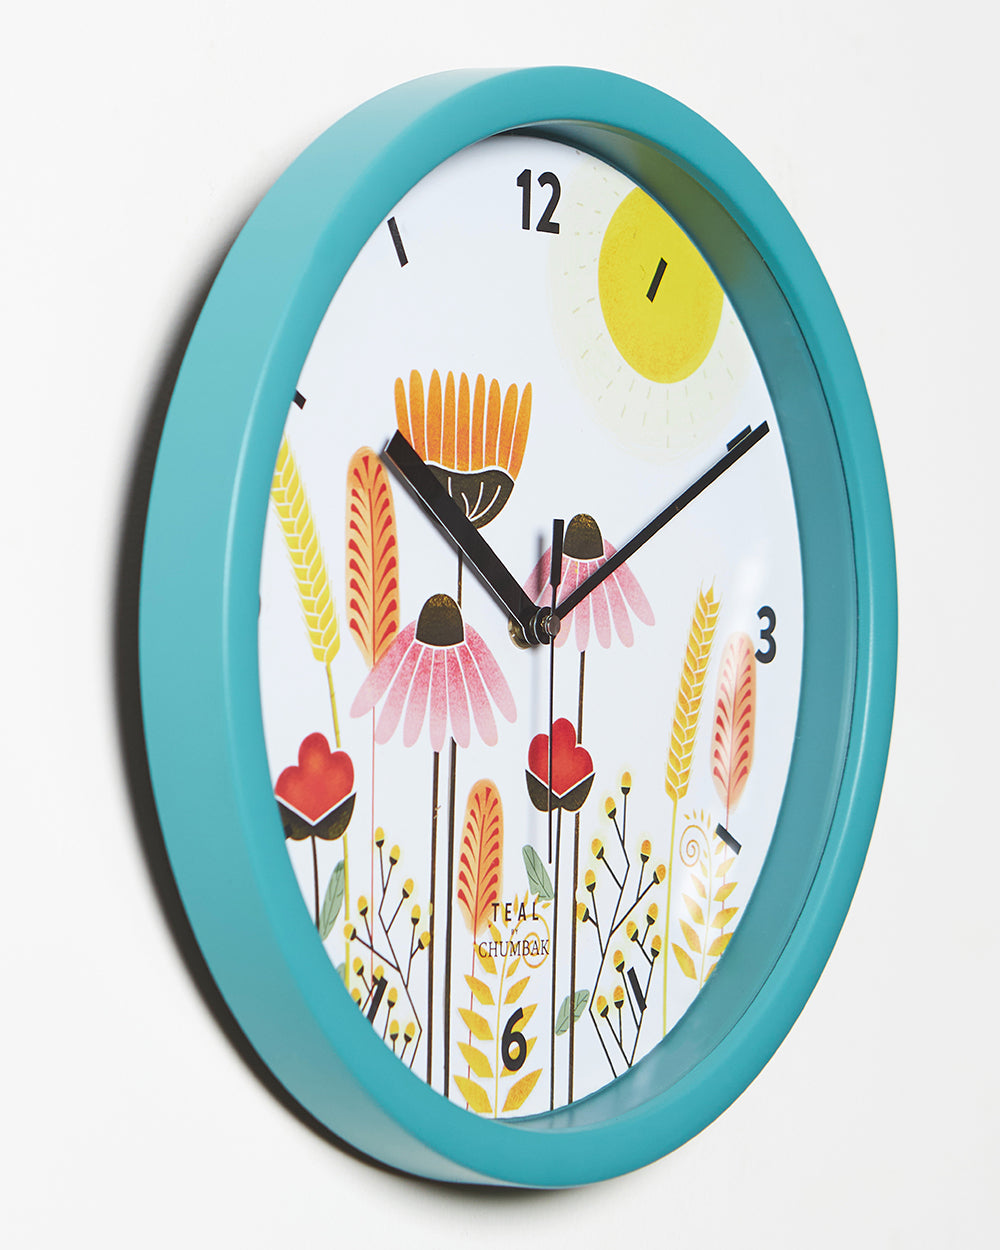 Teal by Chumbak | Sunshine State Wall Clock  | 11 inch